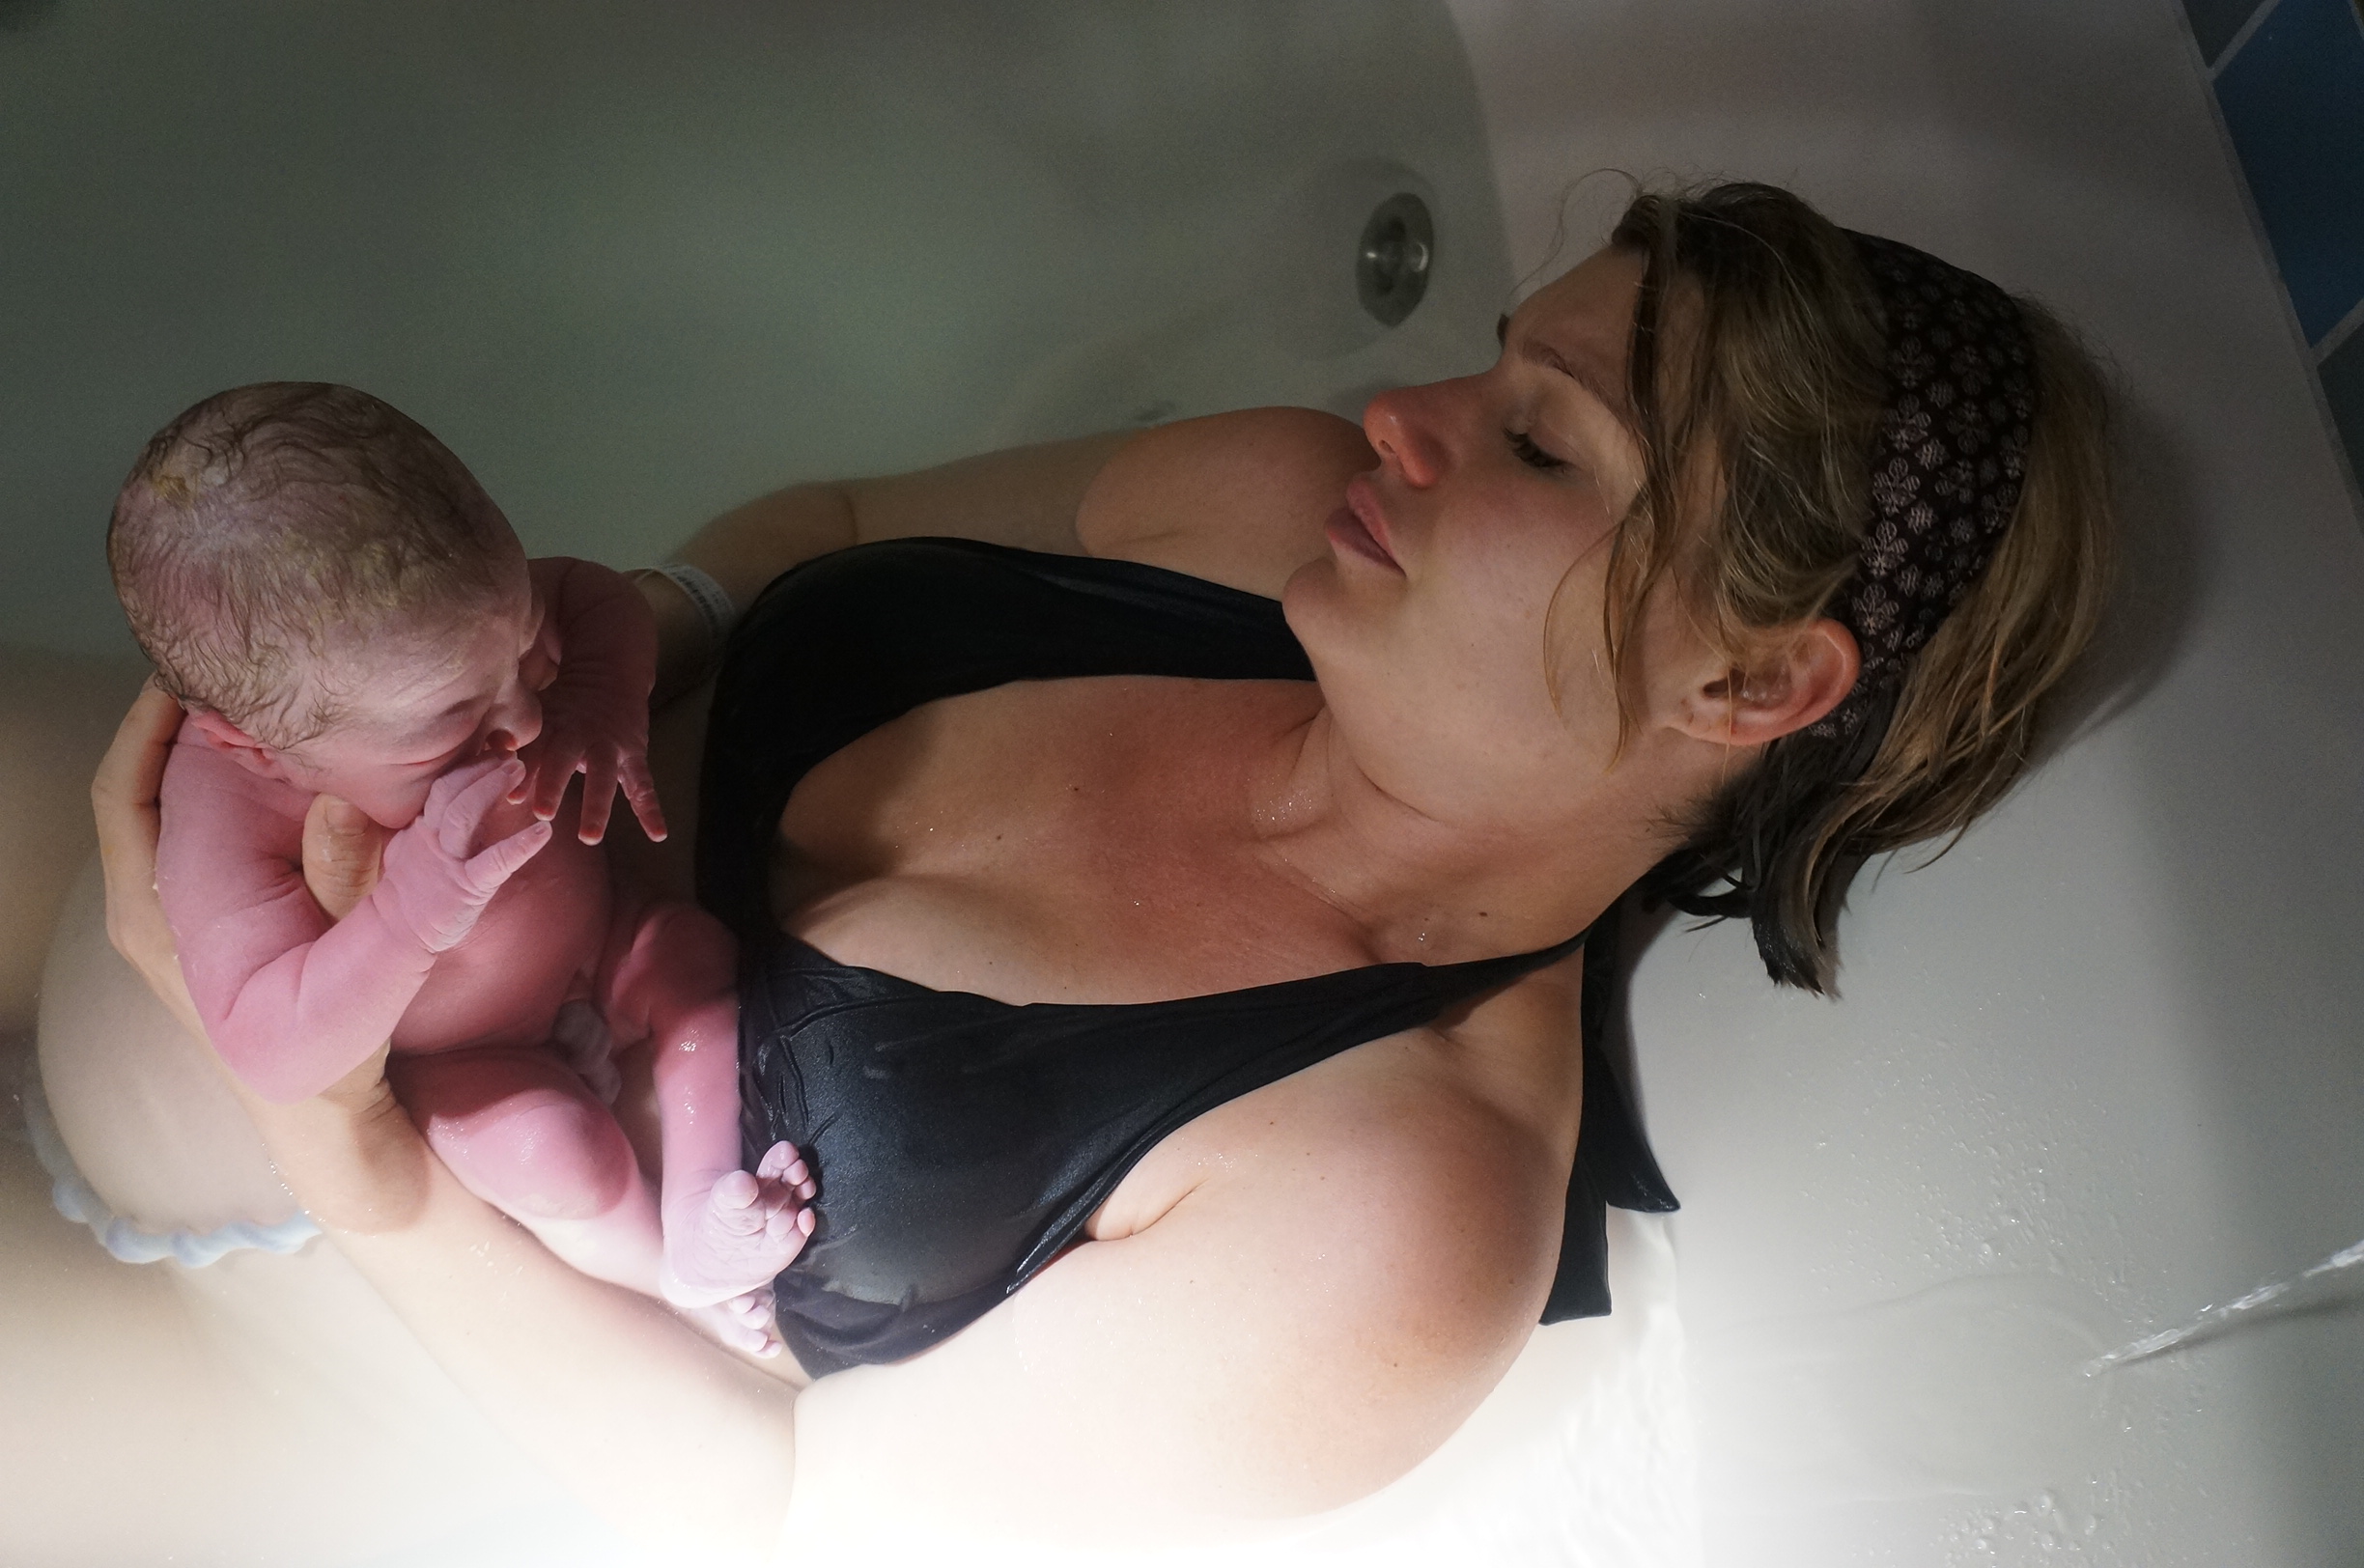 Woman holding baby in waterbirth tub she delivered in